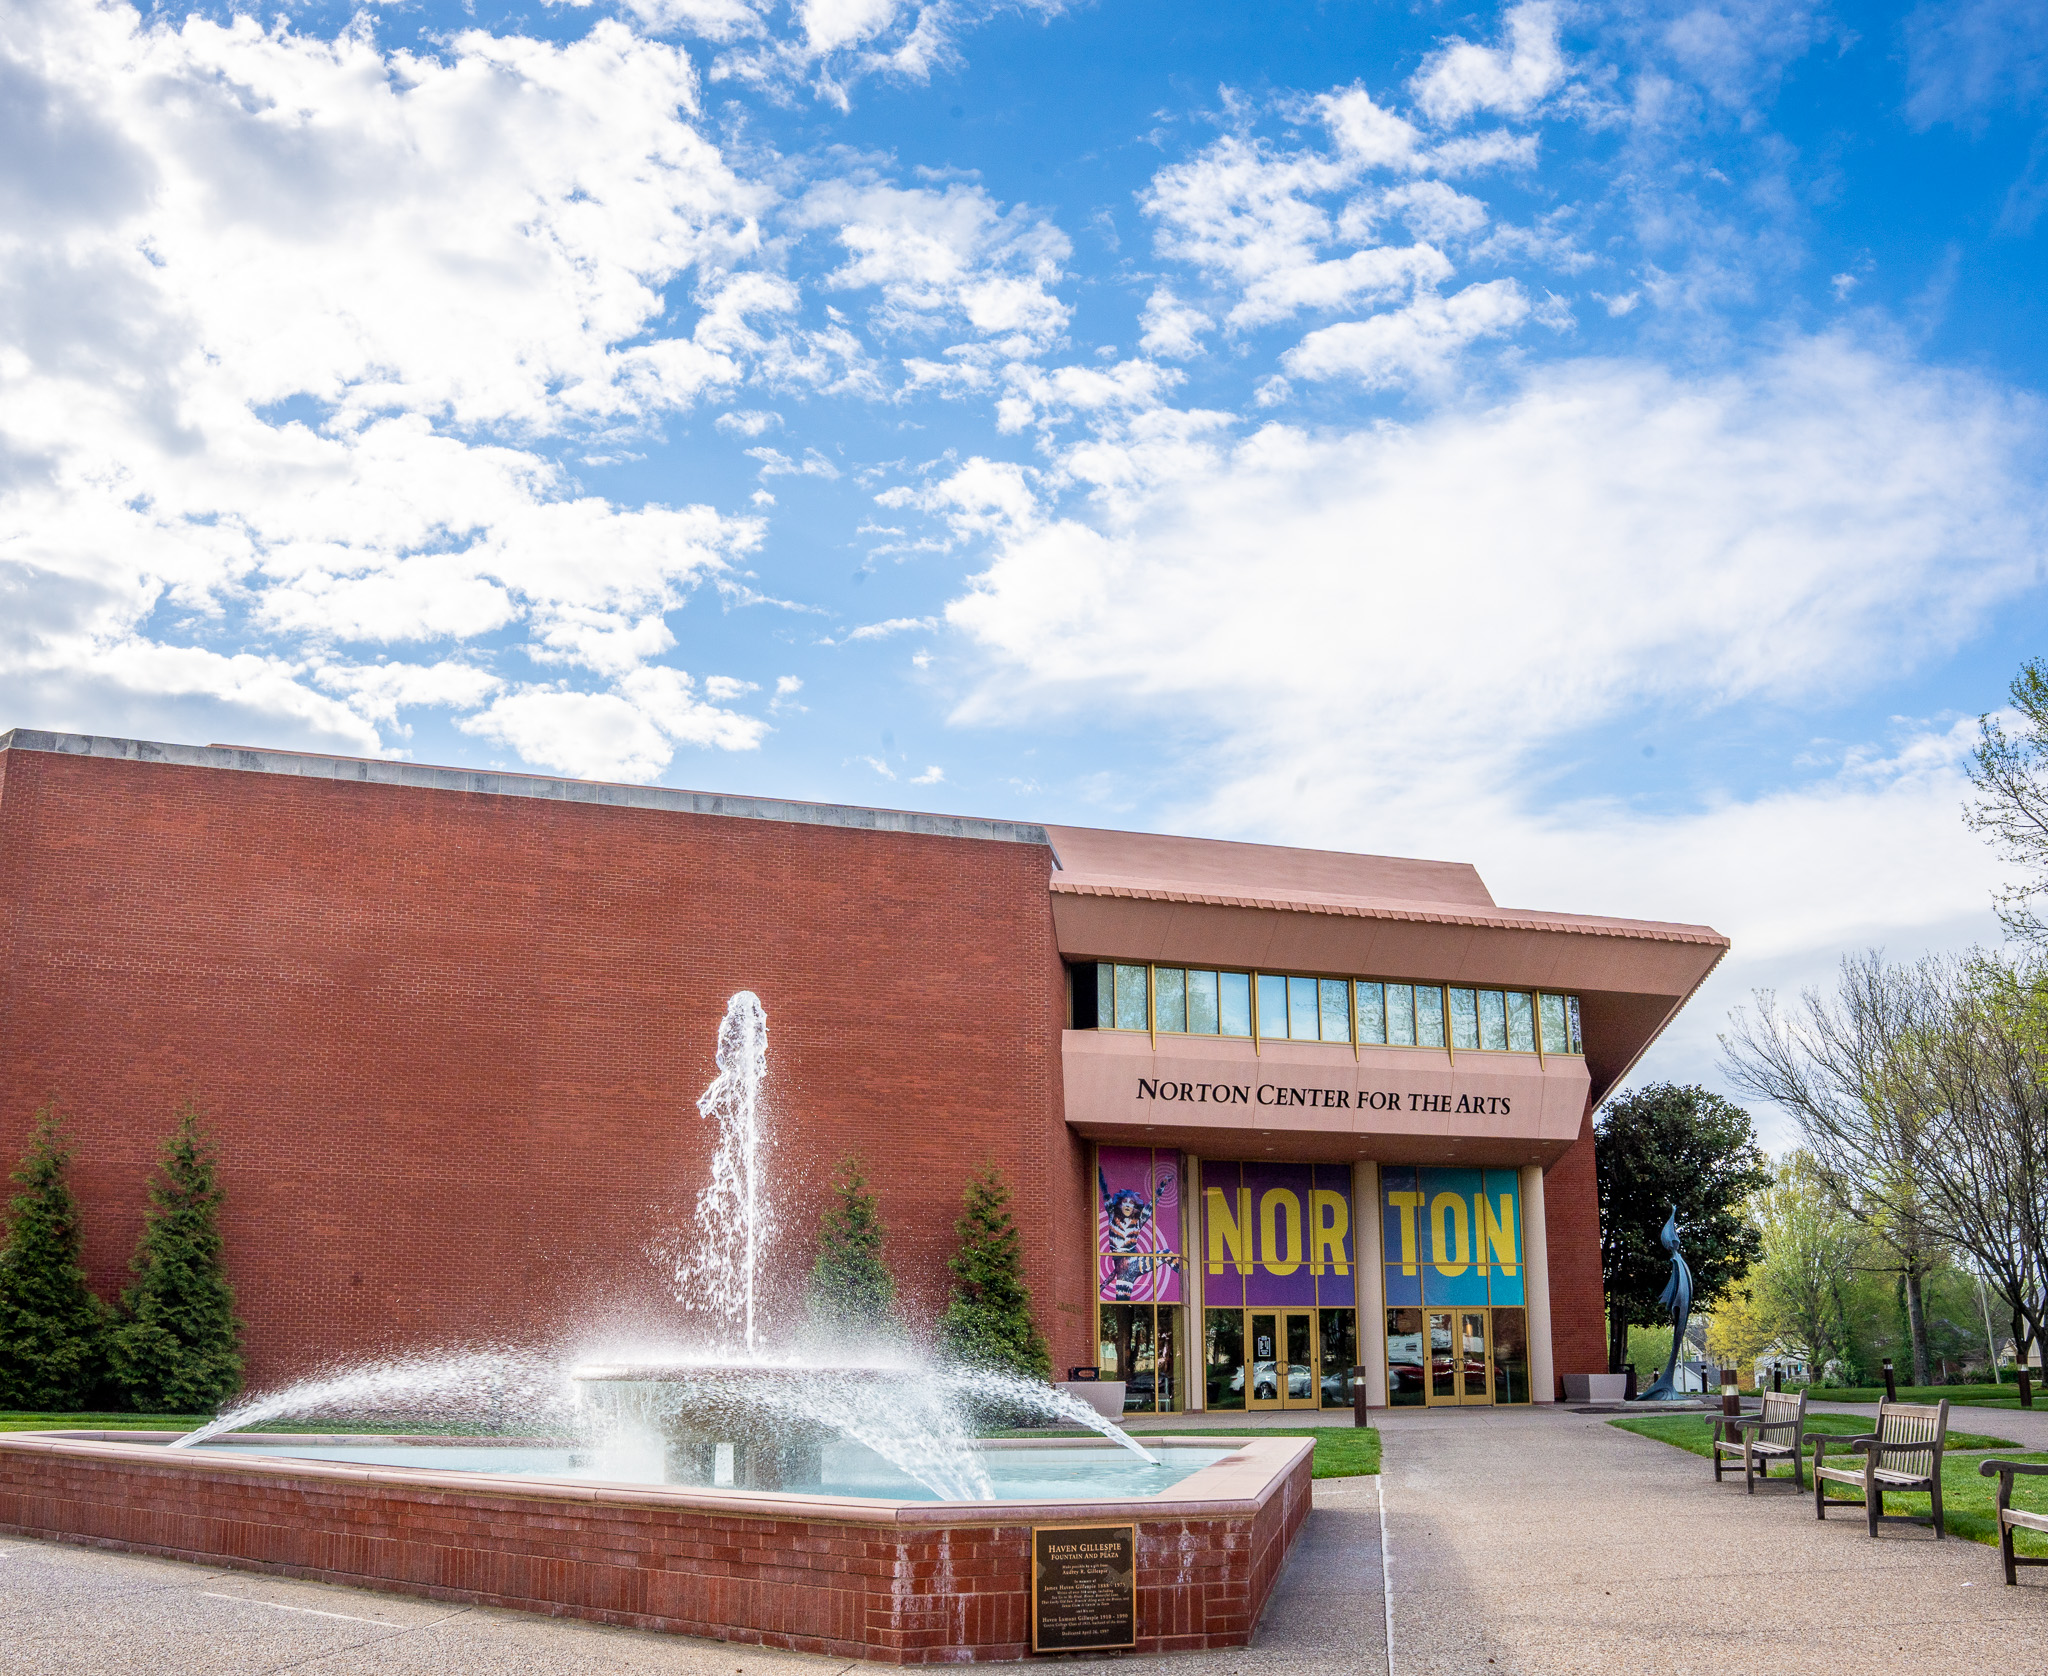 The front of the Norton Center, with the fountain in the foreground and the Noton Center entrance behind it. Blue sky with clouds behind the building.